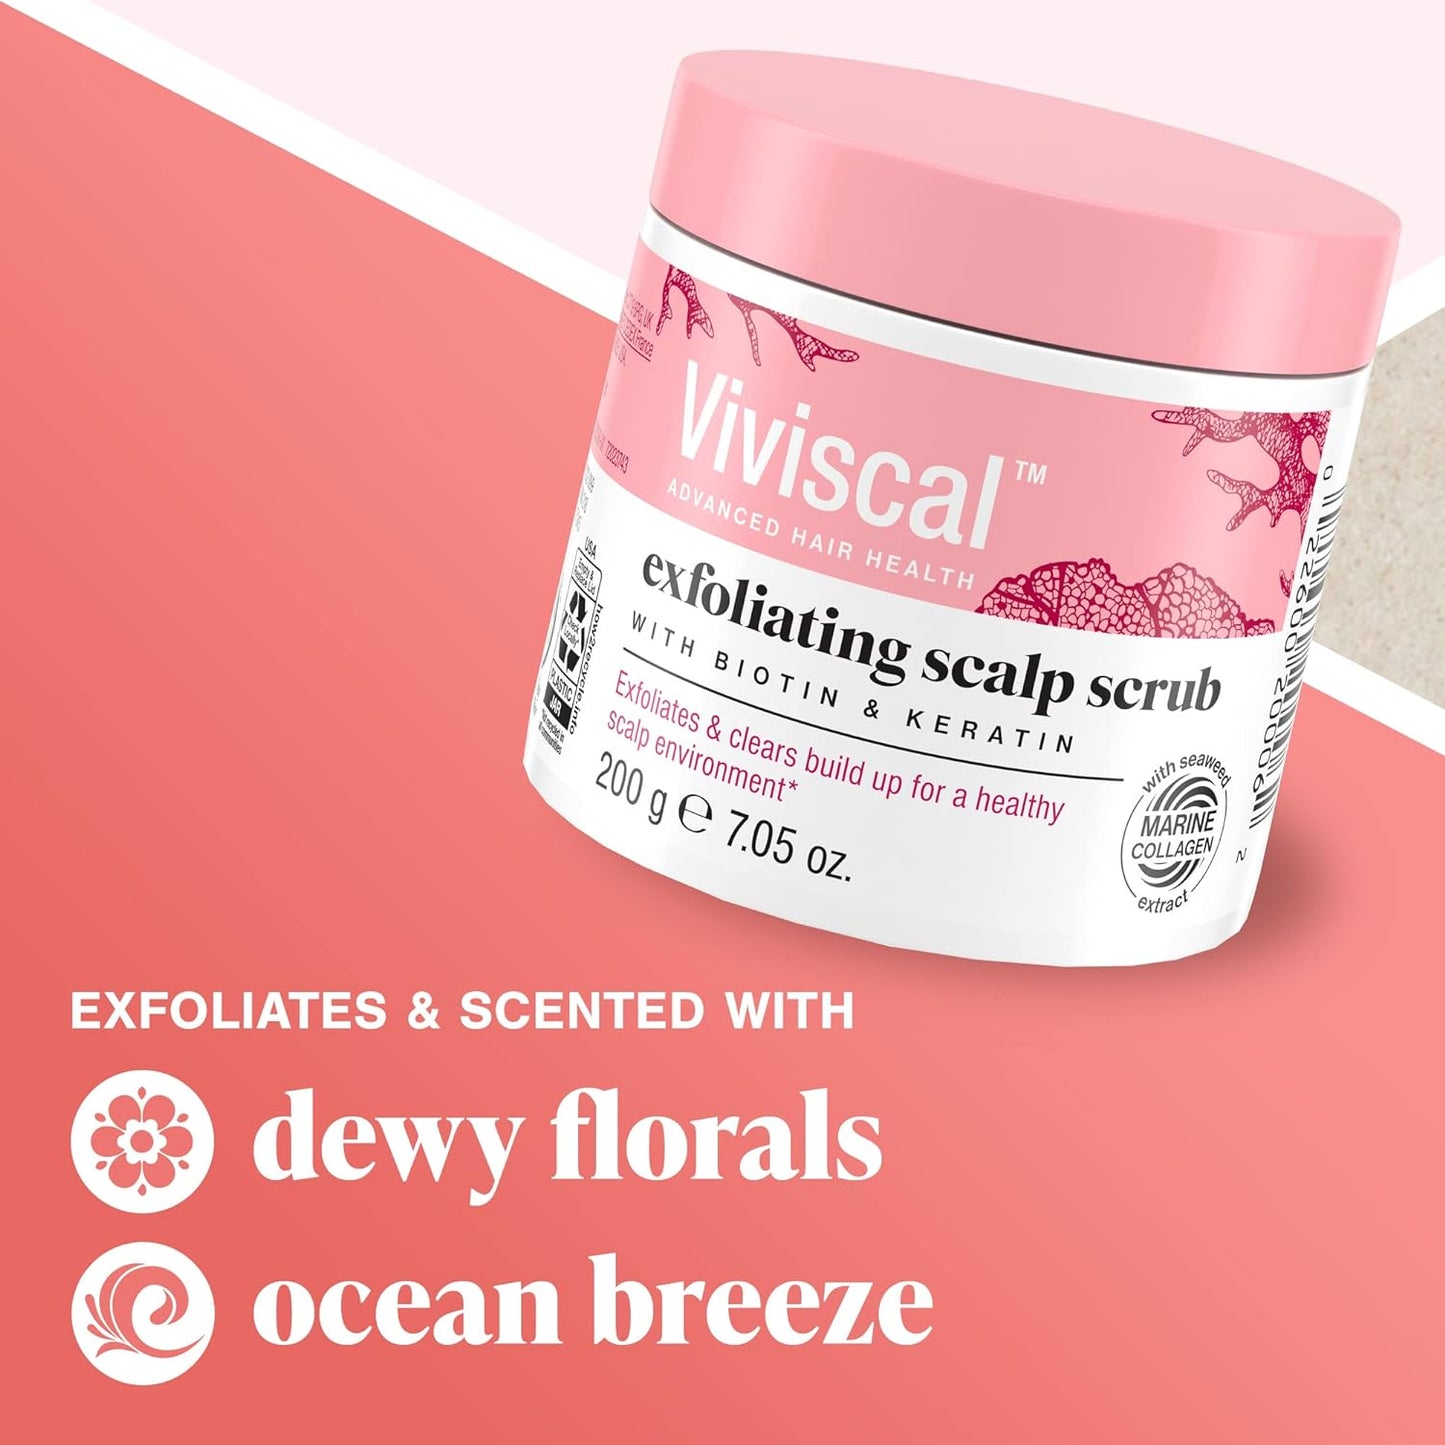 Viviscal exfoliating scalp scrub exfoliates and scented with dewy florals and ocean breeze